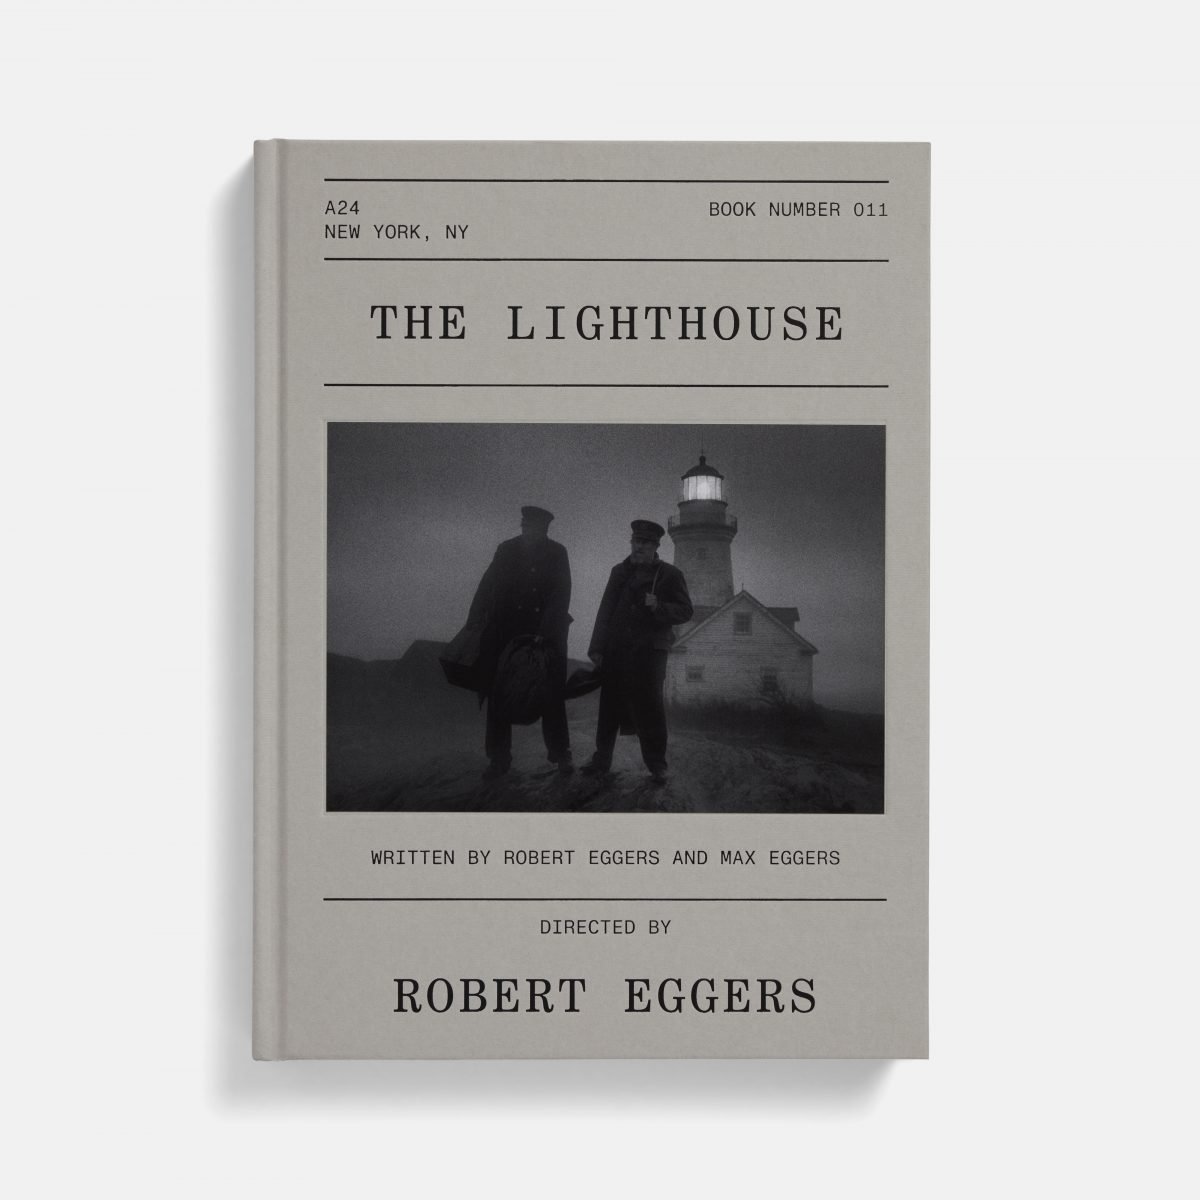 The Lighthouse Screenplay book from A24 cover